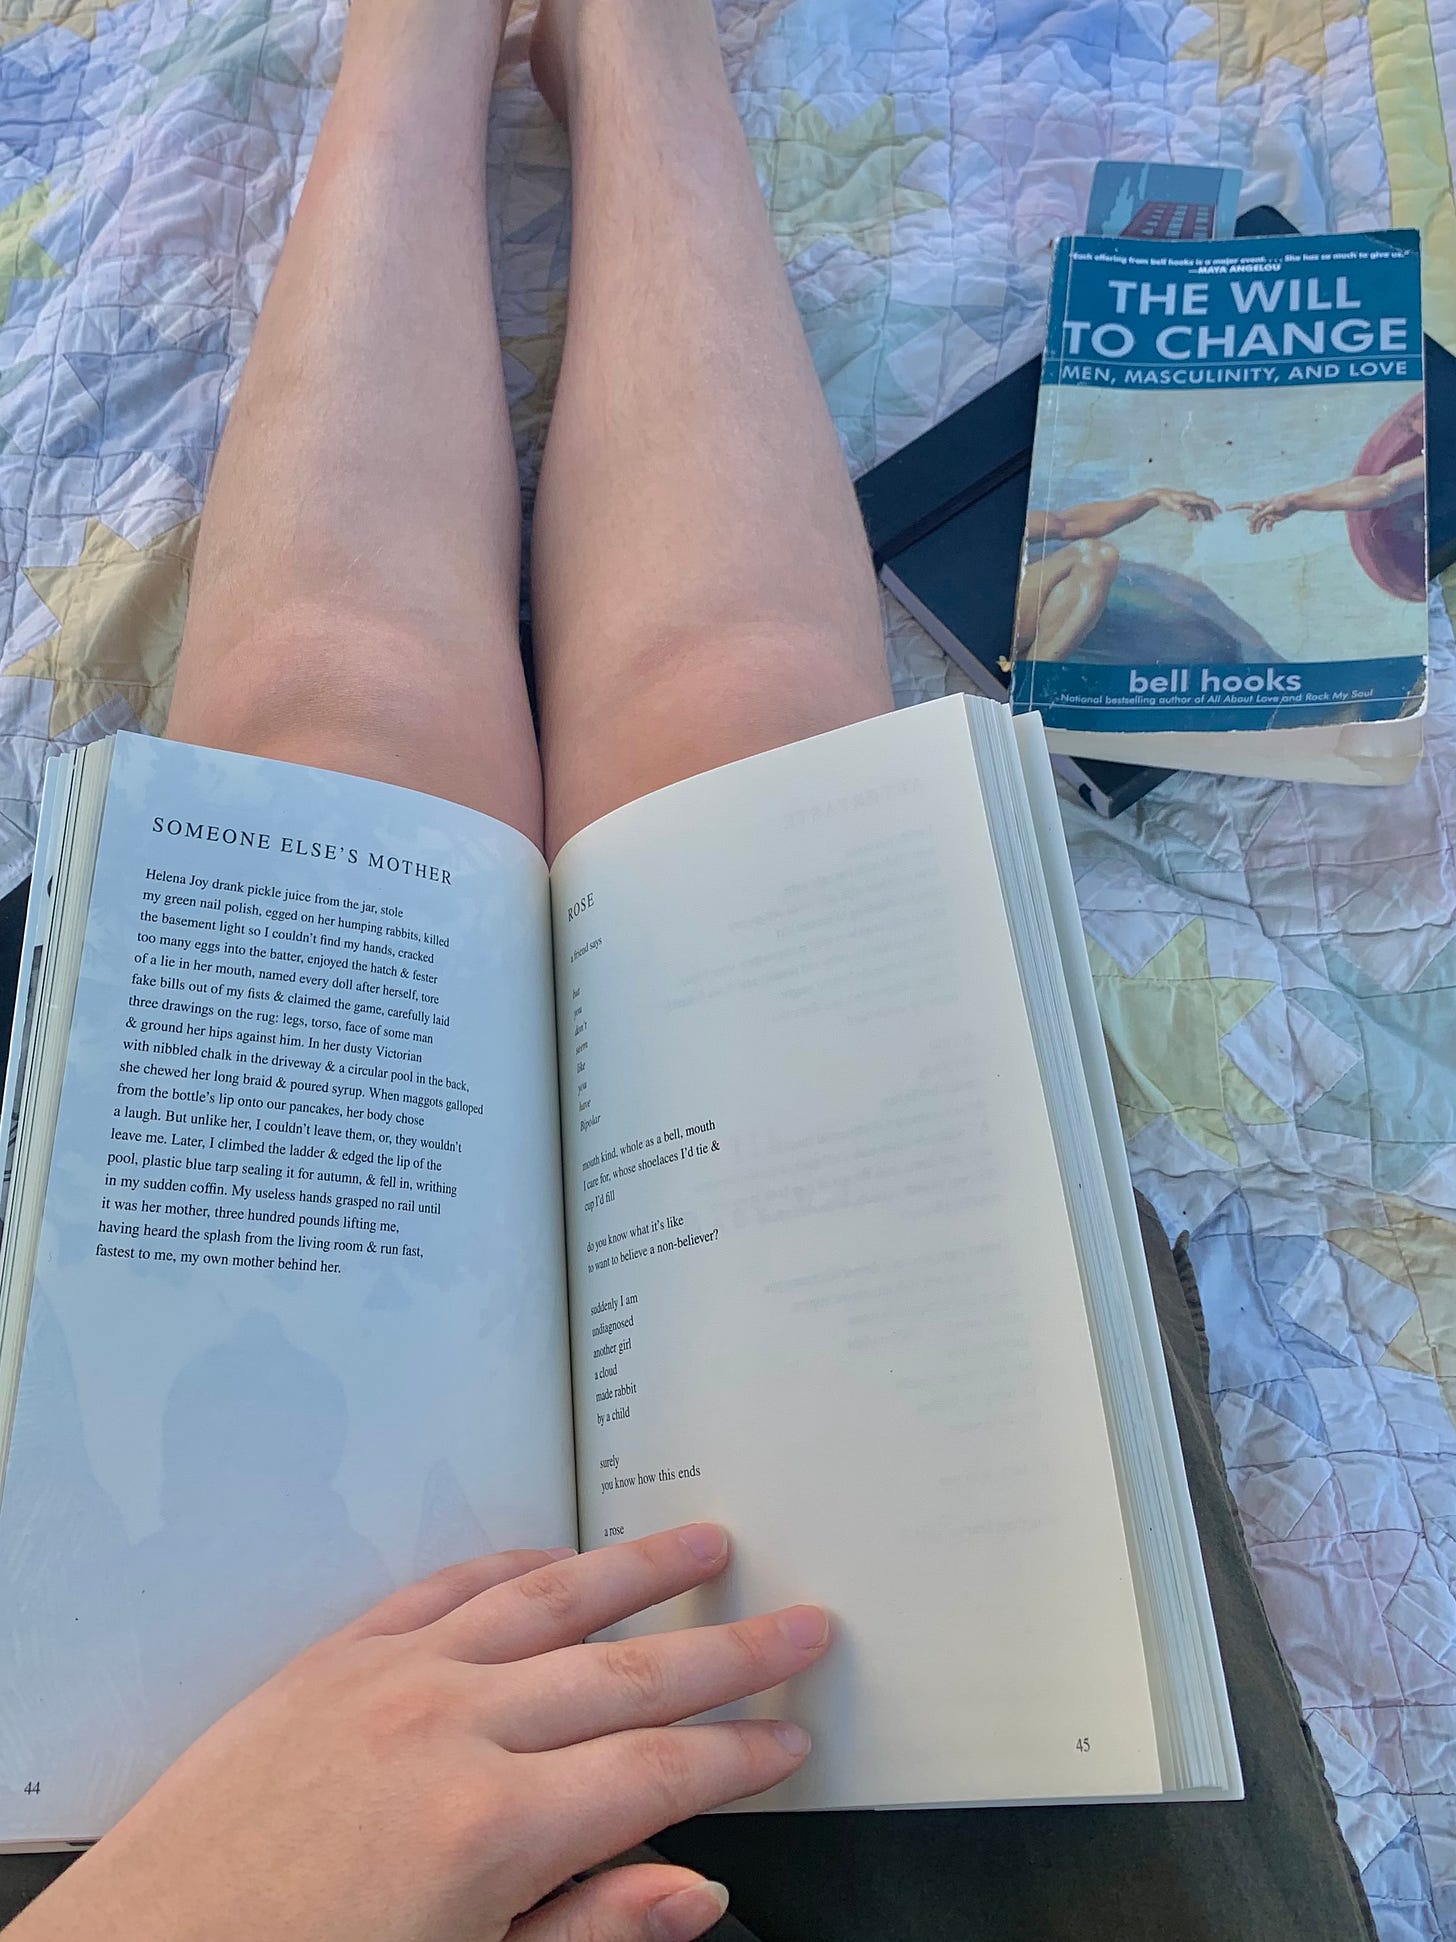 a photo of mira's legs with a book open on their lap. beside them a copy of "the will to change" by bell hooks rests on top of a black journal.